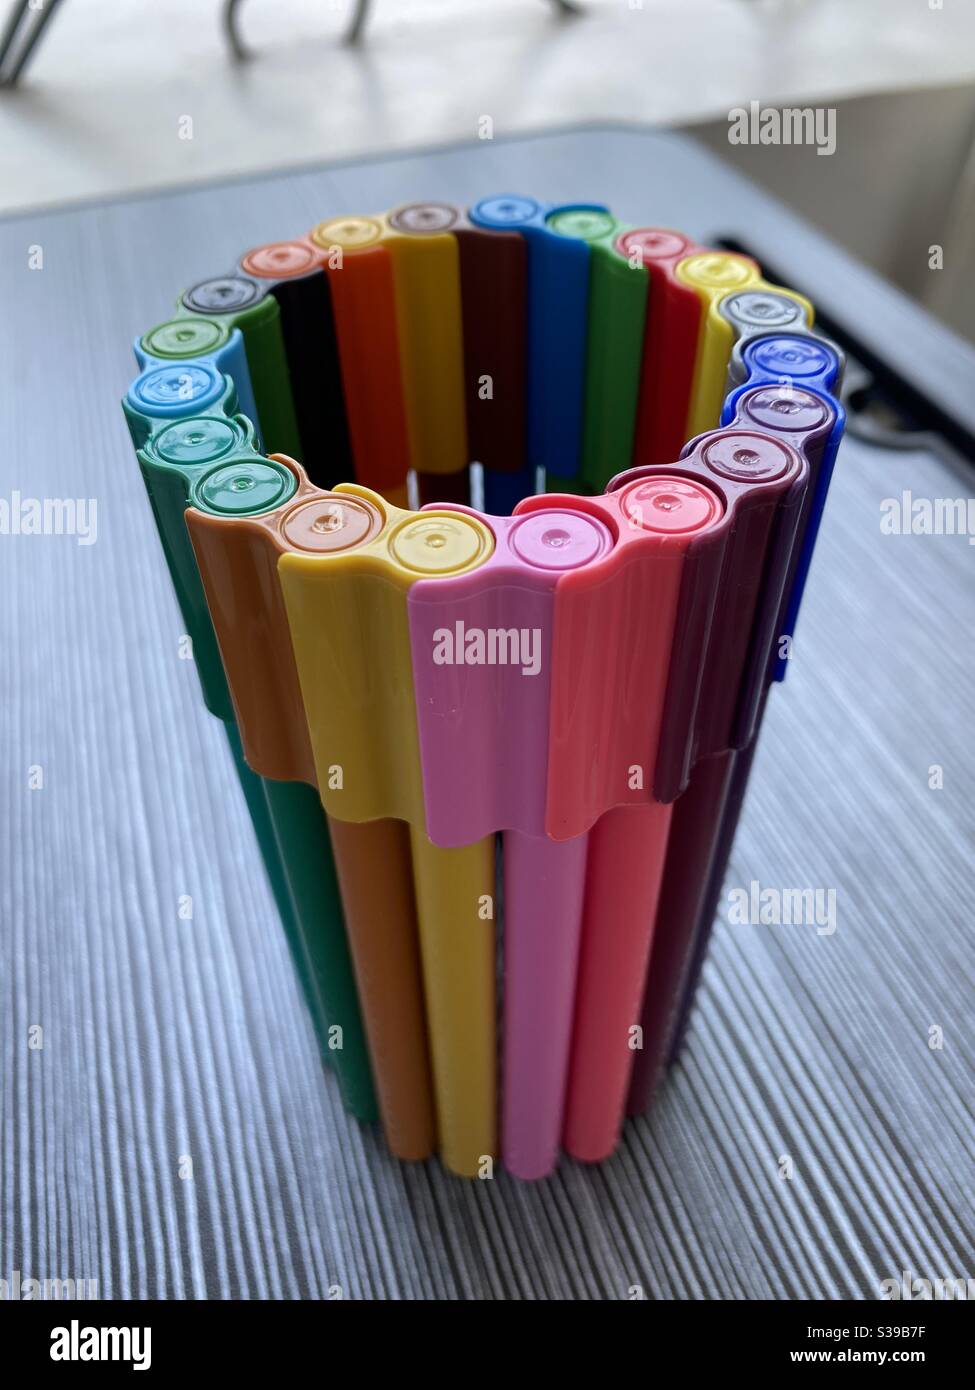 https://c8.alamy.com/comp/S39B7F/color-markers-are-arranged-in-a-circle-on-the-table-S39B7F.jpg